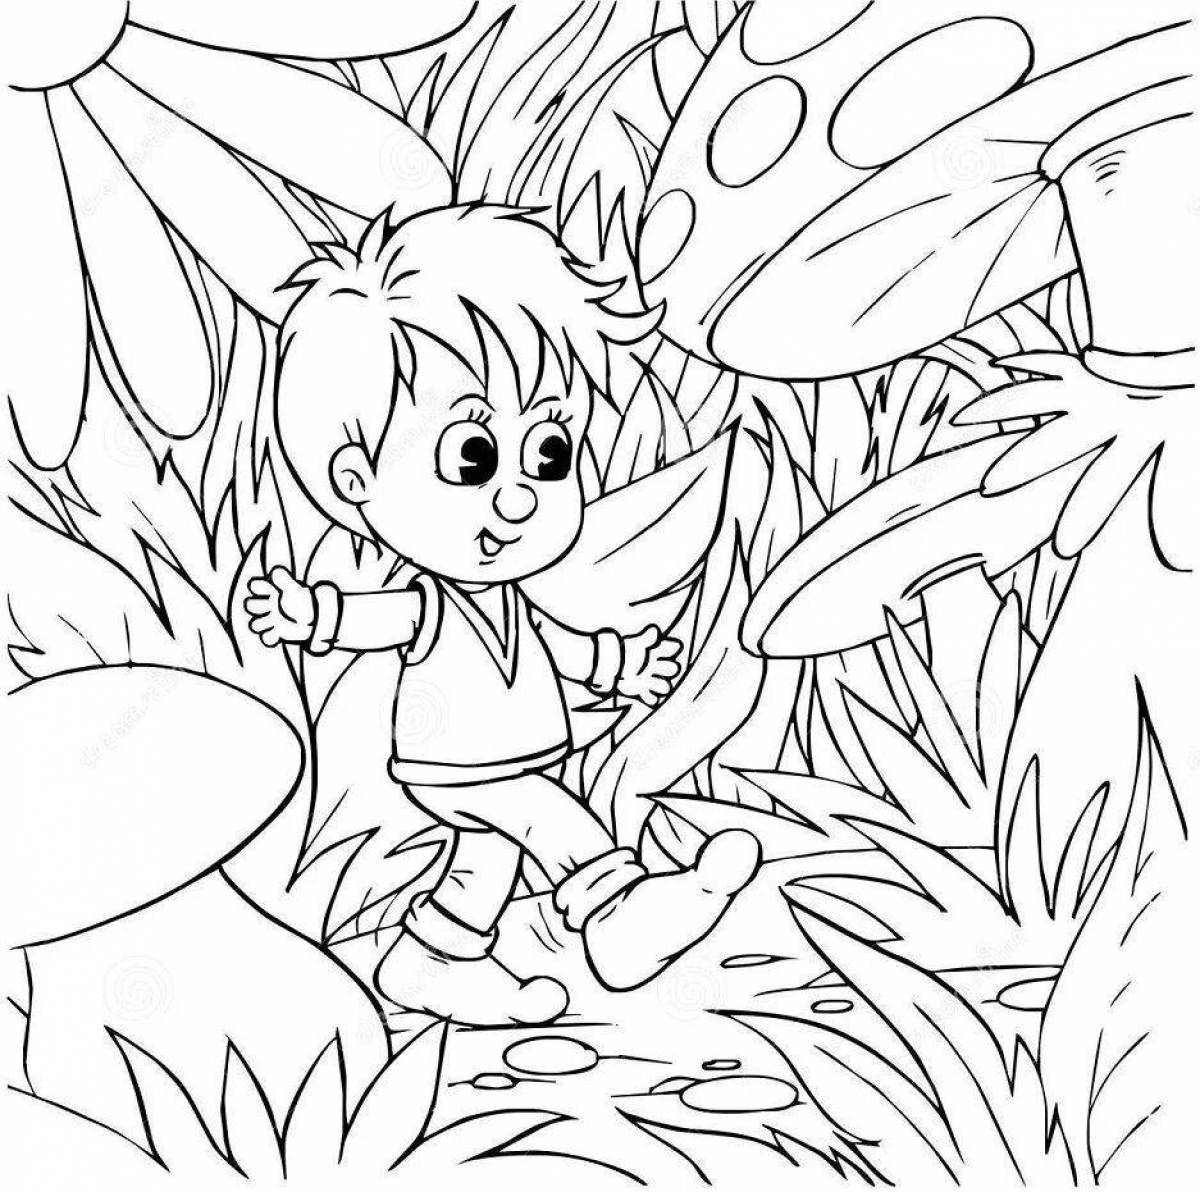 Colorful little boy coloring page